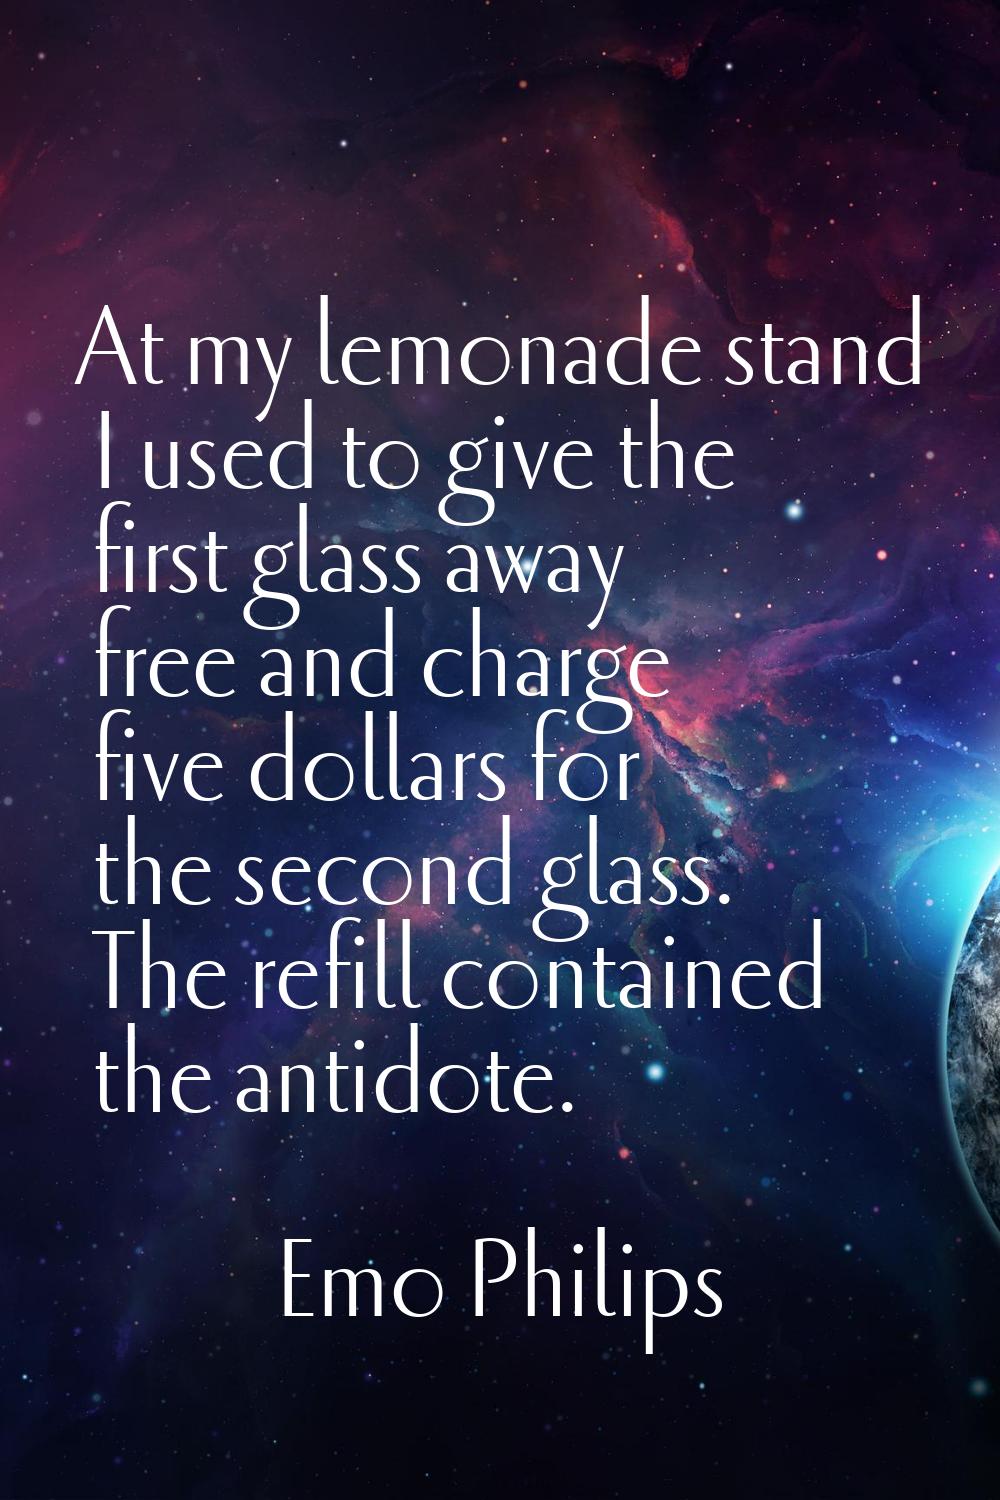 At my lemonade stand I used to give the first glass away free and charge five dollars for the secon